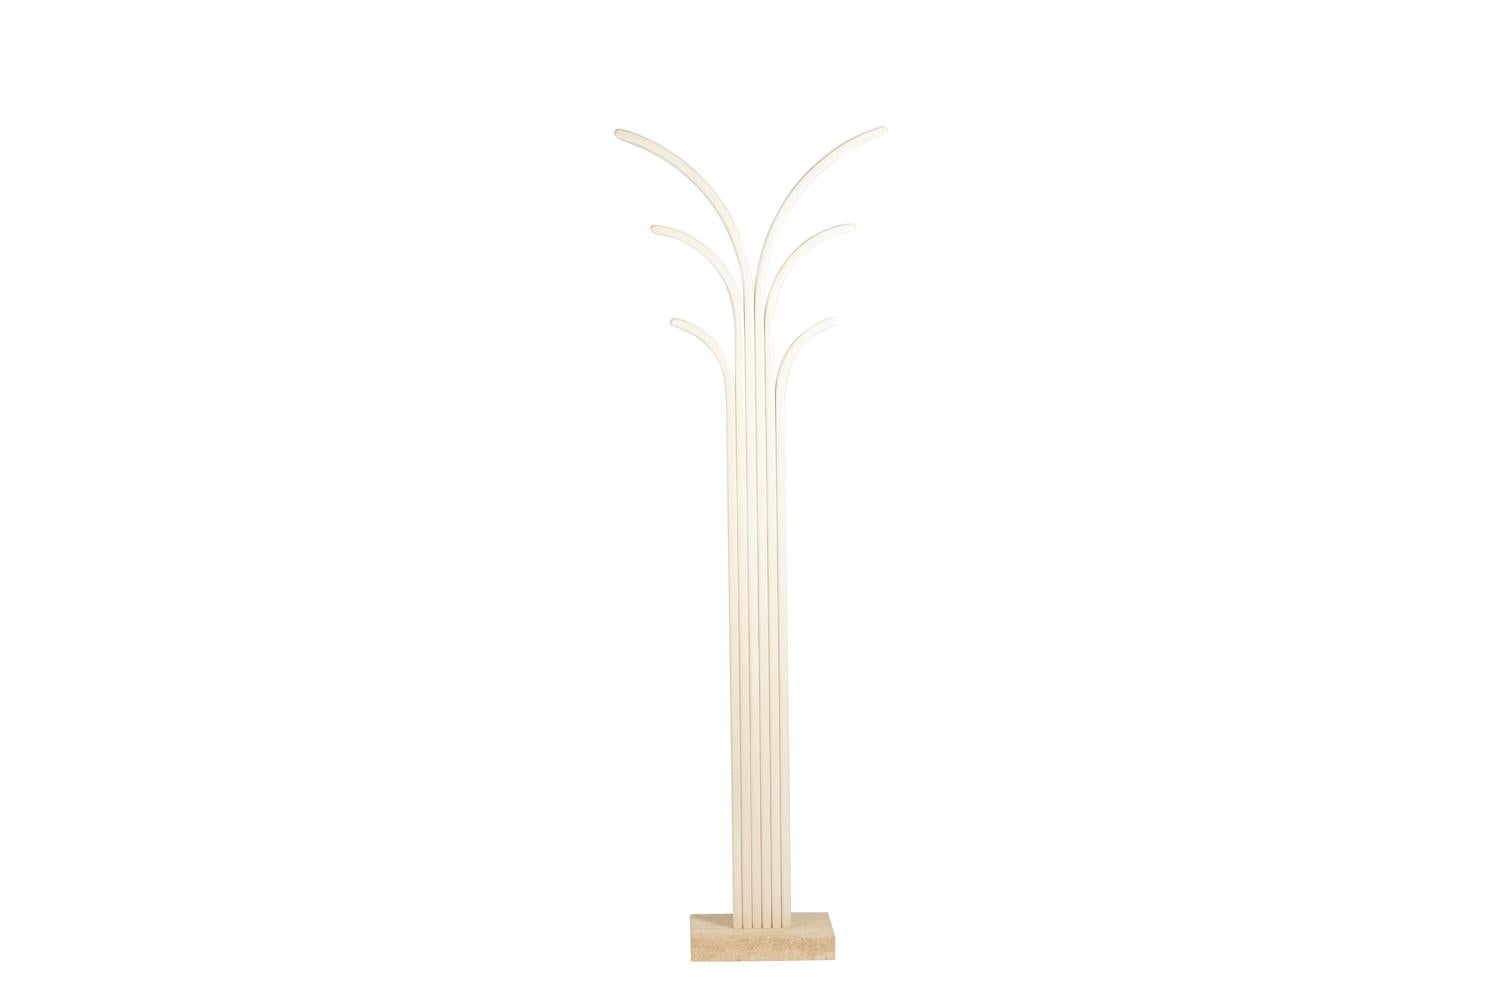 Coat rack in lacquered wood, in the shape of a palm tree, in cream colour, resting on a rectangular travertine base.

French work realized in the 1970s.